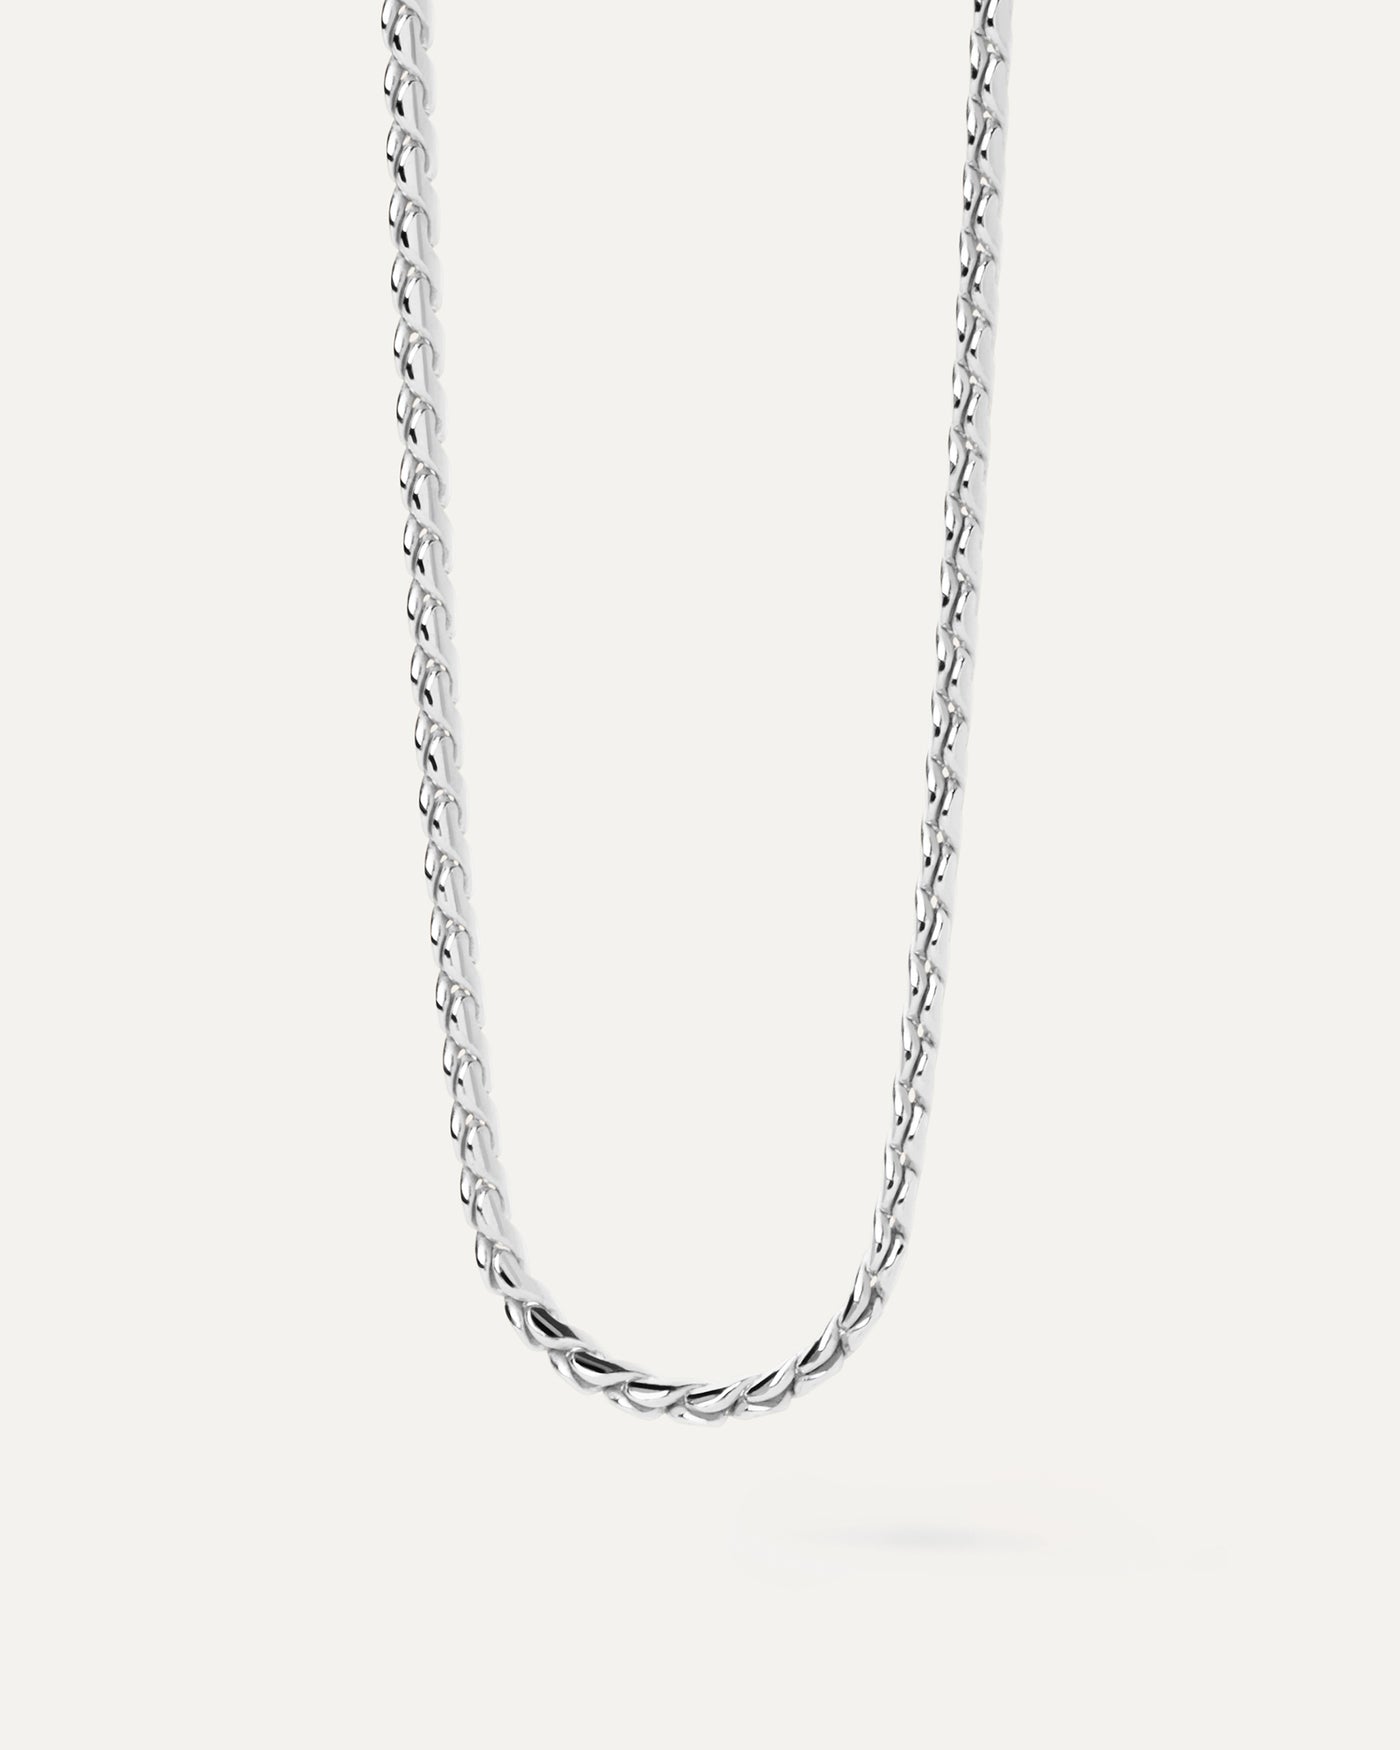 2023 Selection | Large Serpentine Silver Chain Necklace. Modern serpentine silver thick chain necklace with braided links. Get the latest arrival from PDPAOLA. Place your order safely and get this Best Seller. Free Shipping.